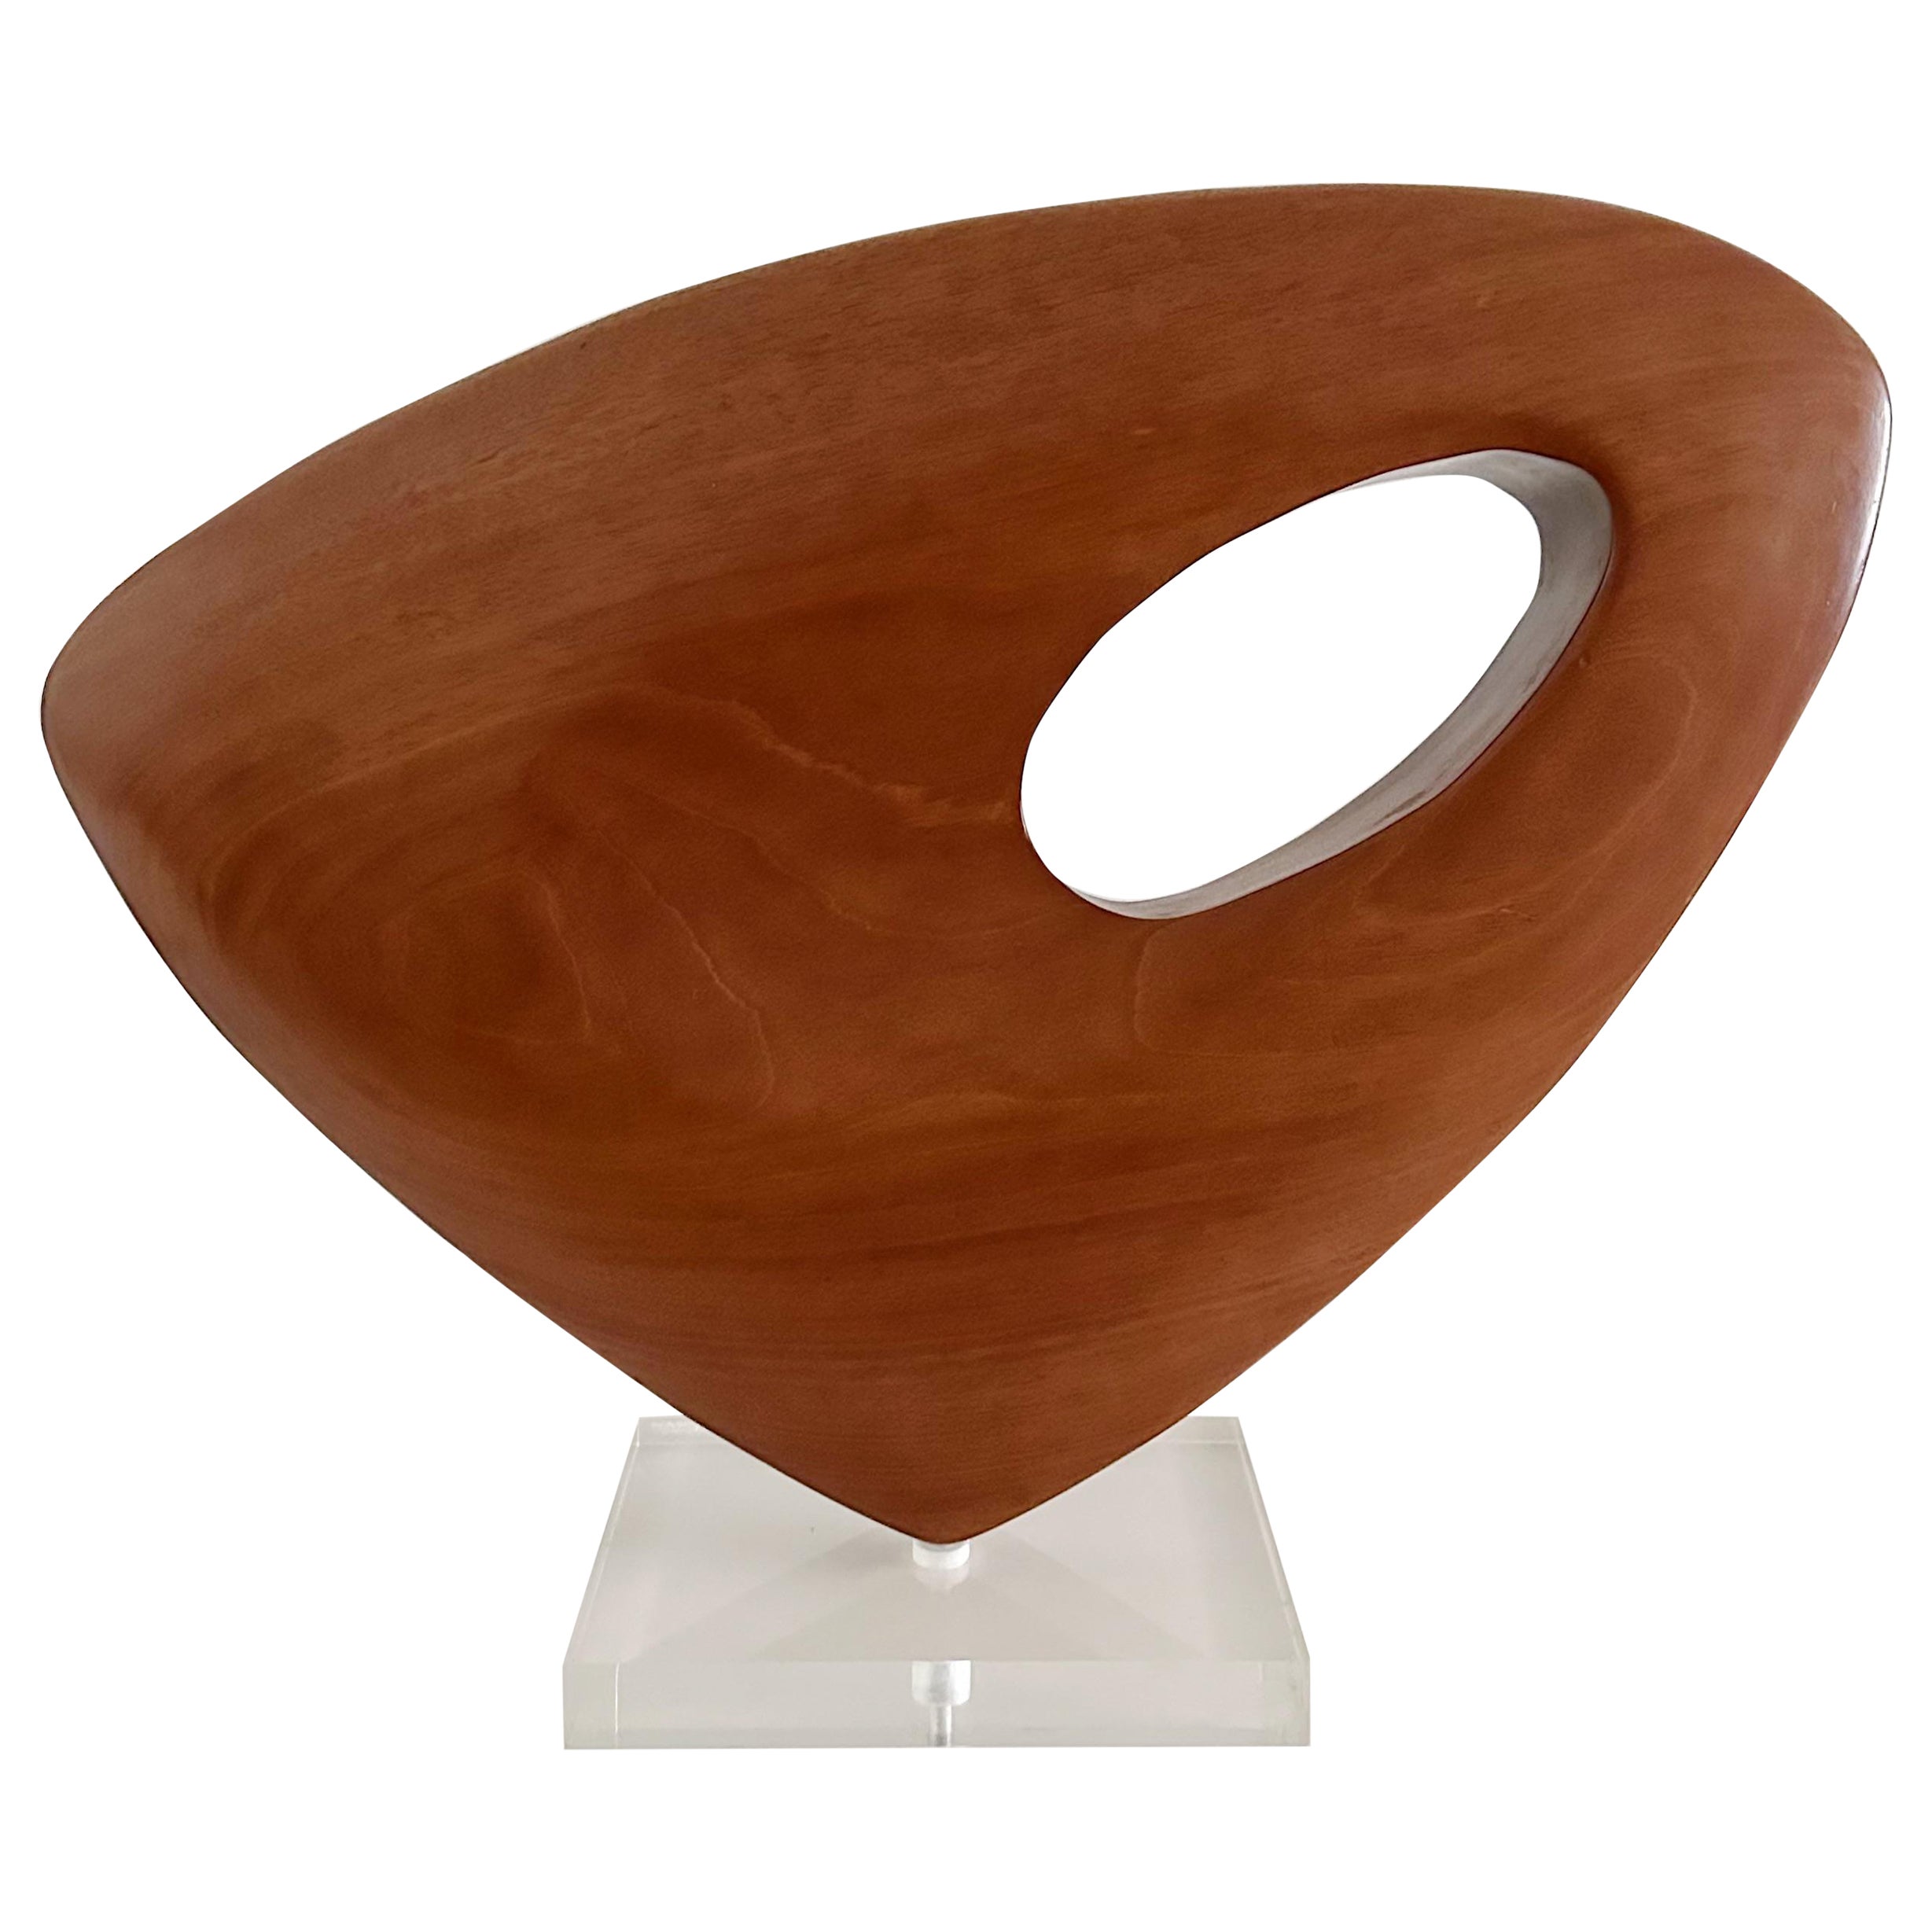 Vintage Biomorphic Abstract Wood Sculpture on Lucite Base For Sale